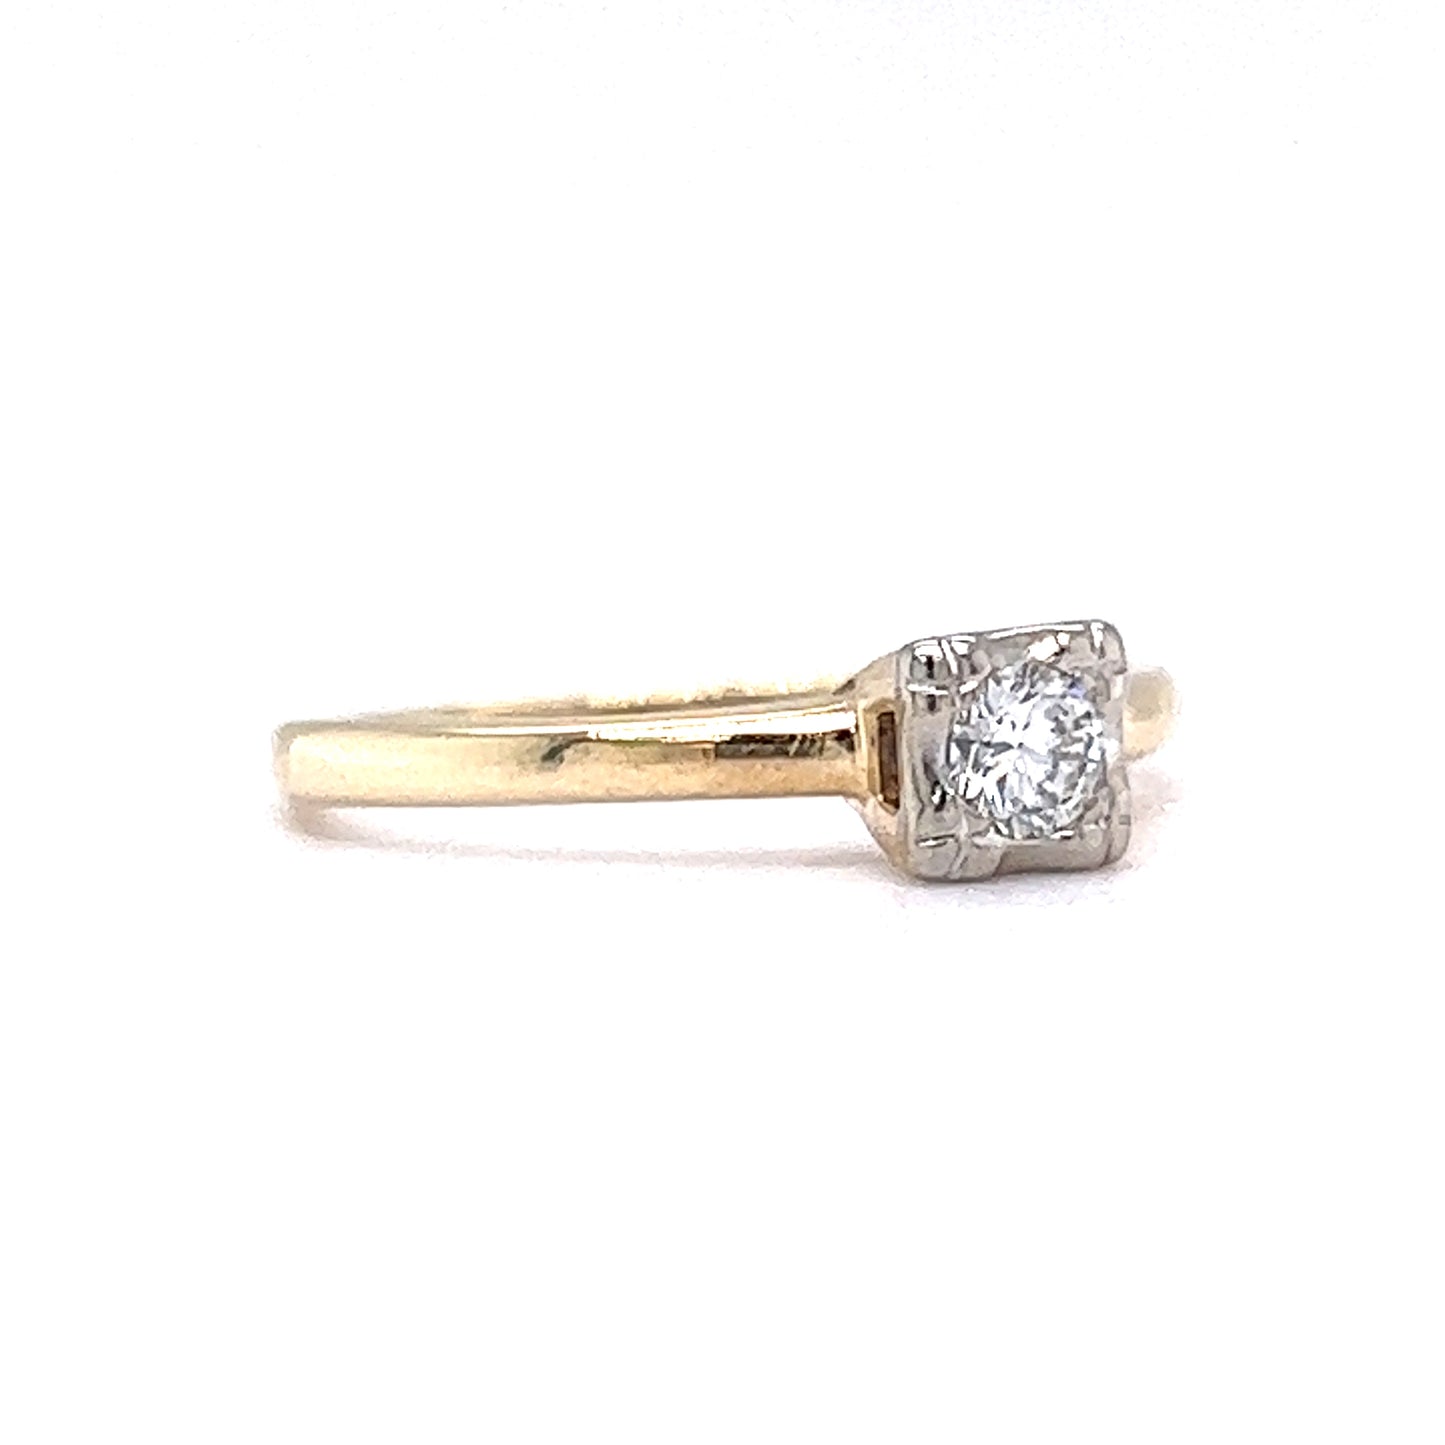 .16 Vintage Retro Diamond Solitaire Engagement Ring in 14k Yellow & White Gold